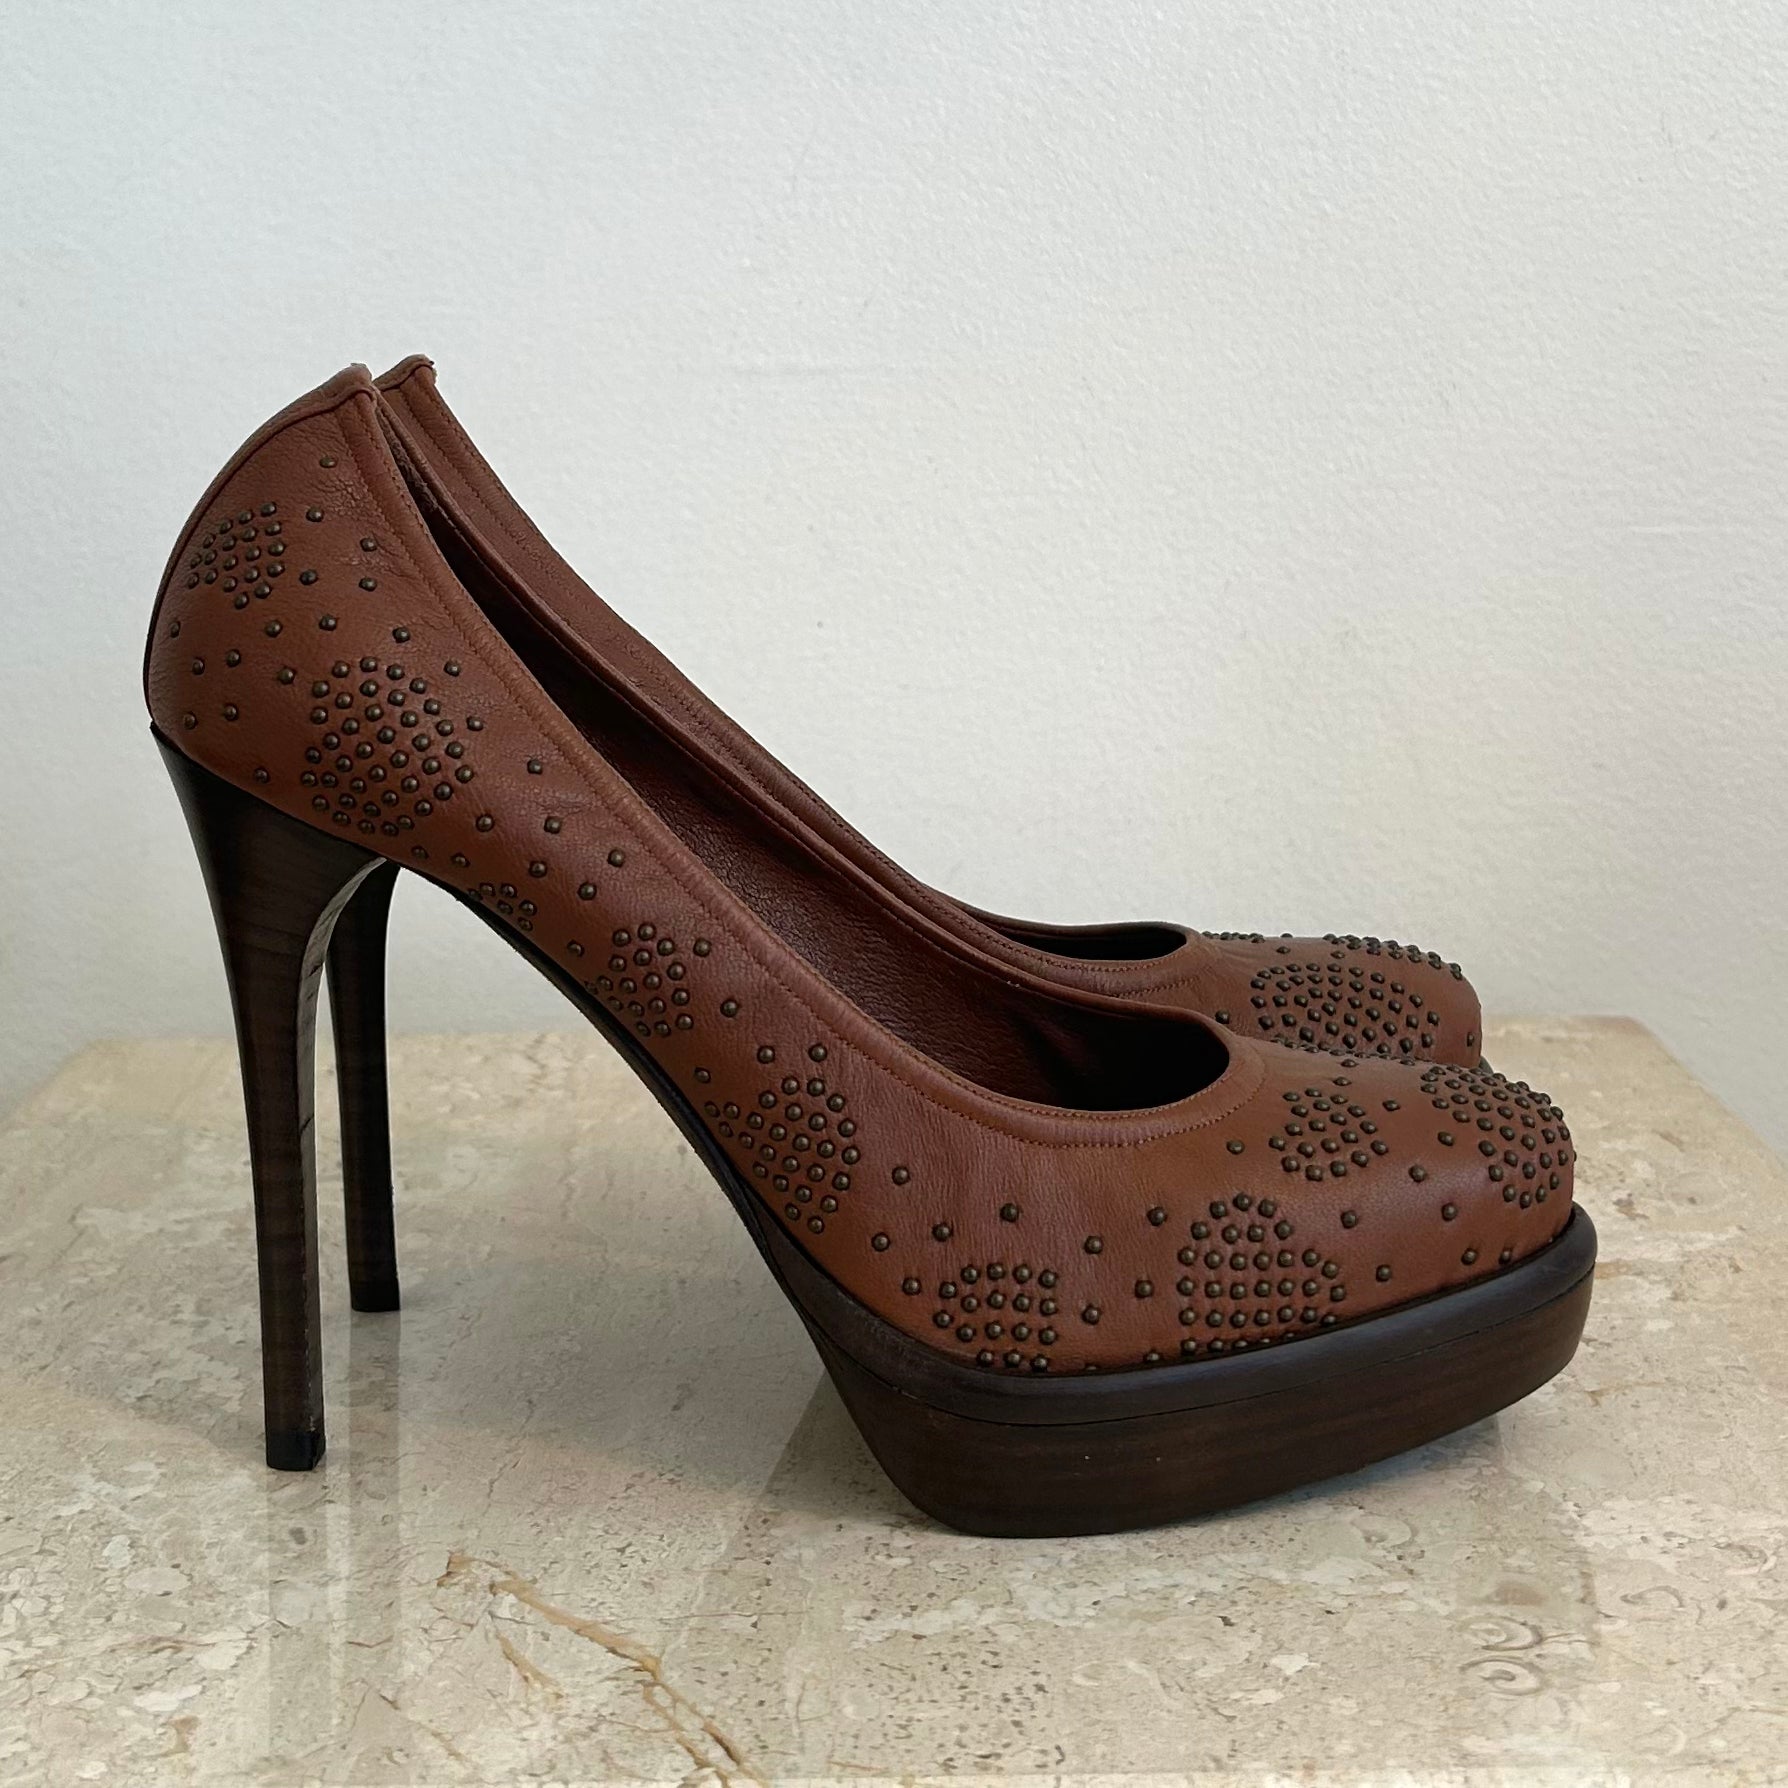 Pre-Owned BURBERRY Brown Leather Studded Platform Heels - Size 37.5